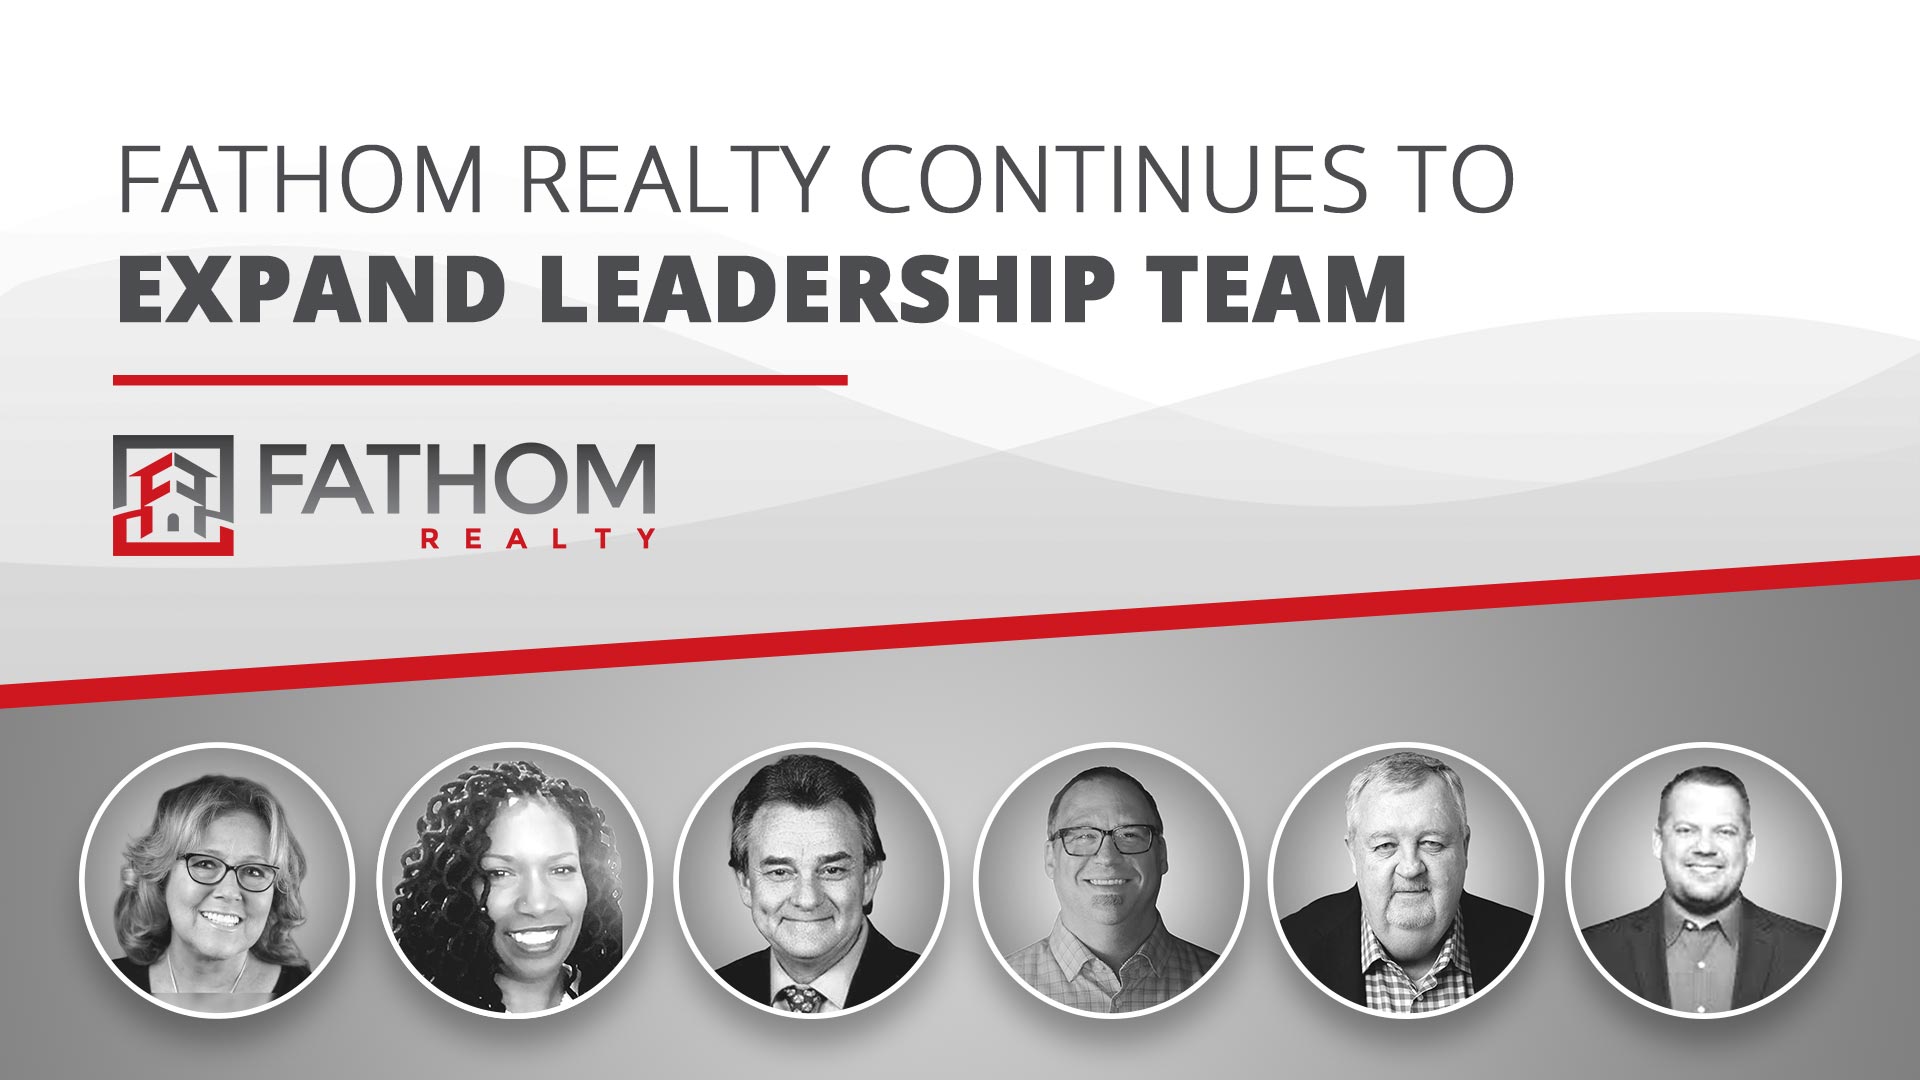 Featured image for “Fathom Realty Continues to Expand Leadership Team”